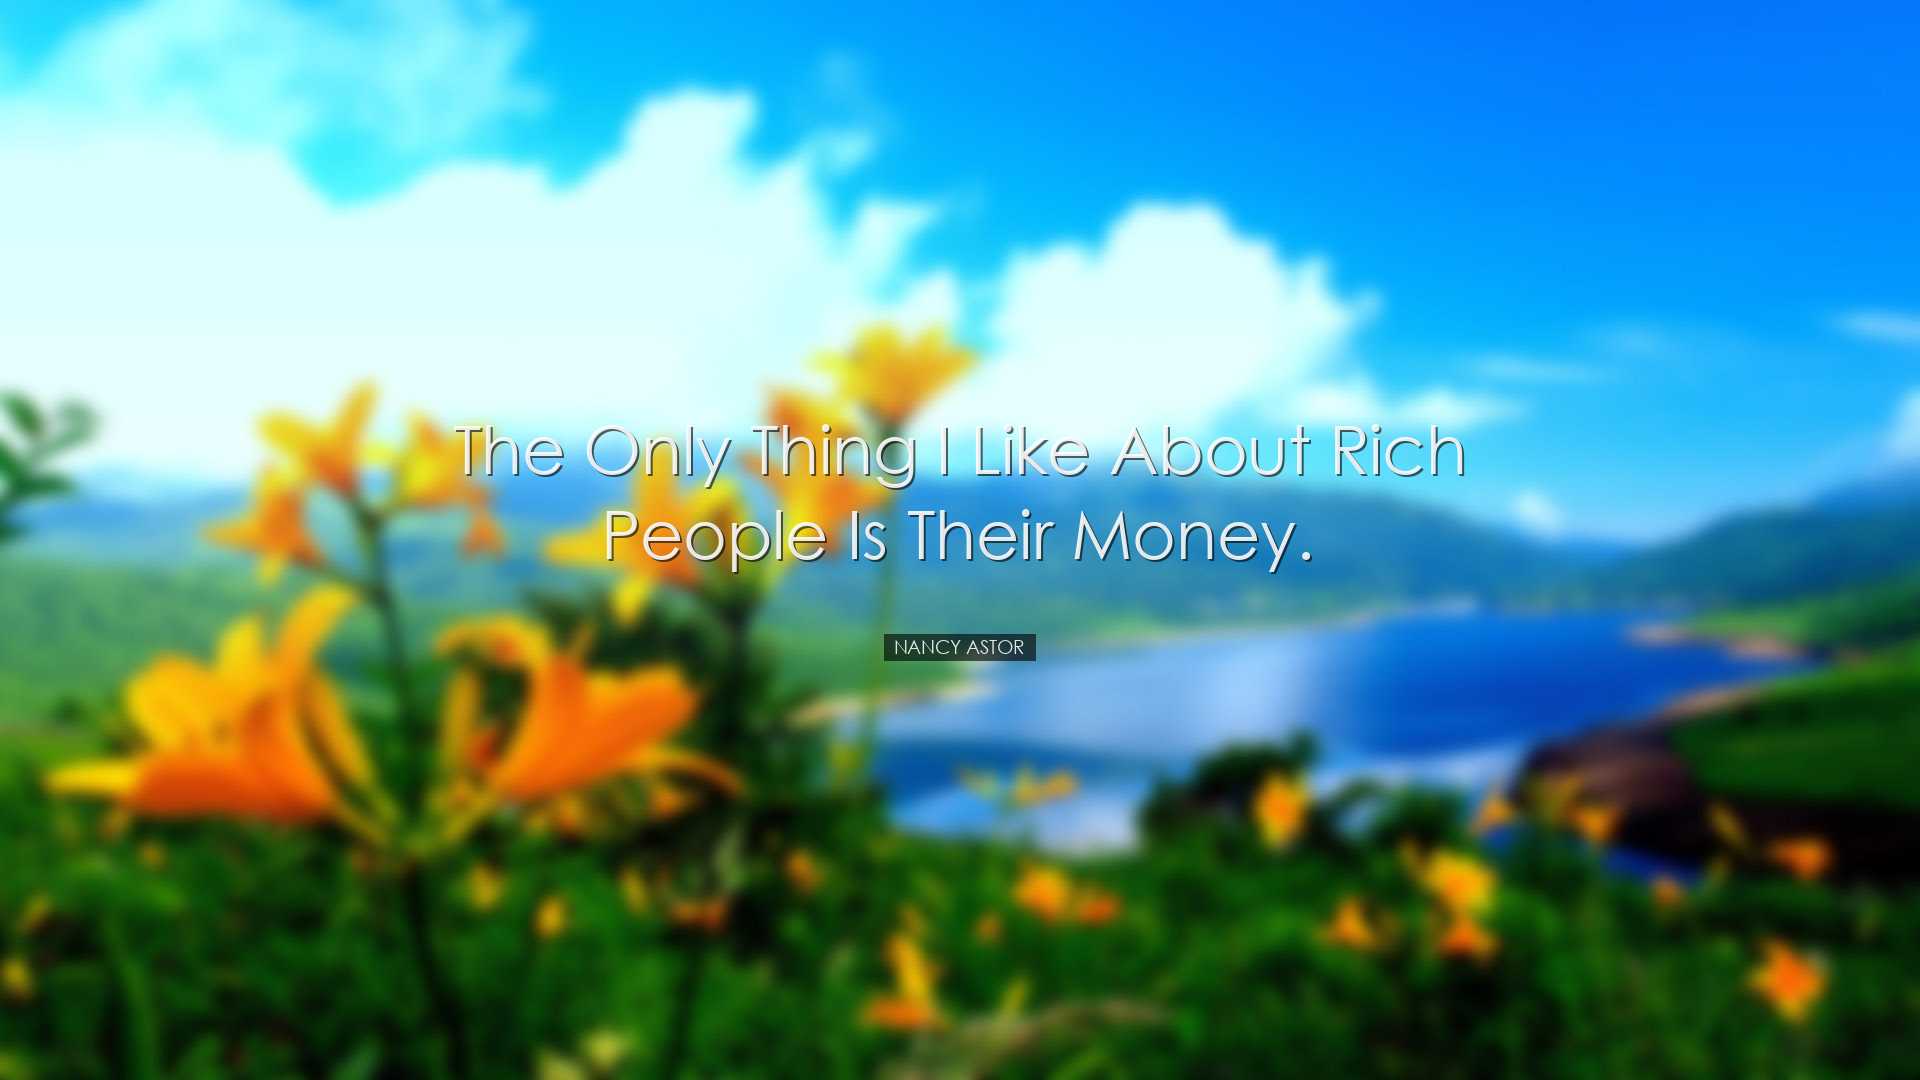 The only thing I like about rich people is their money. - Nancy As